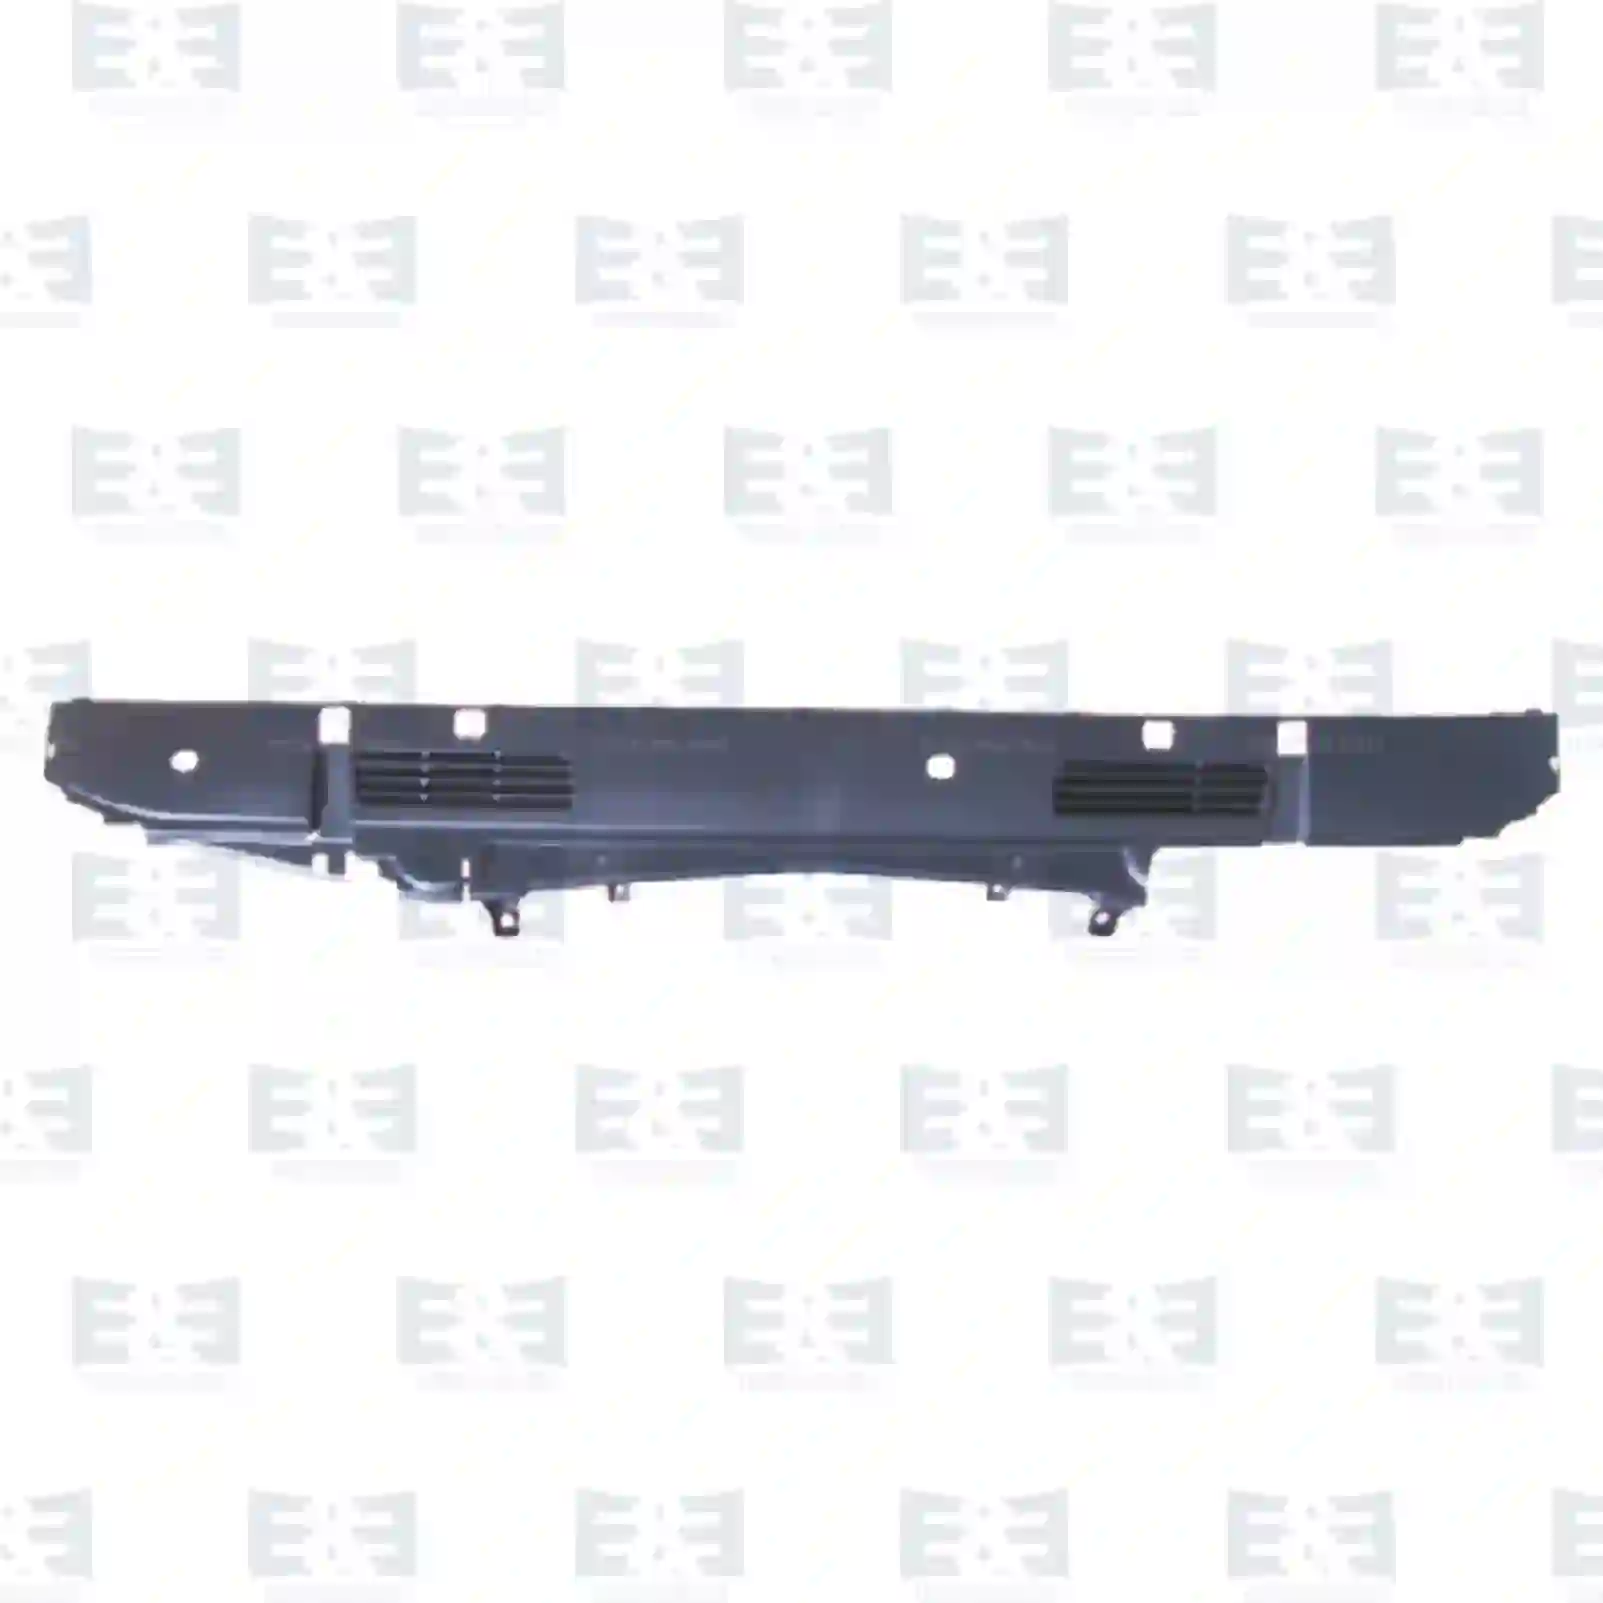  Front panel, without sealing stripes and adhesive dots || E&E Truck Spare Parts | Truck Spare Parts, Auotomotive Spare Parts